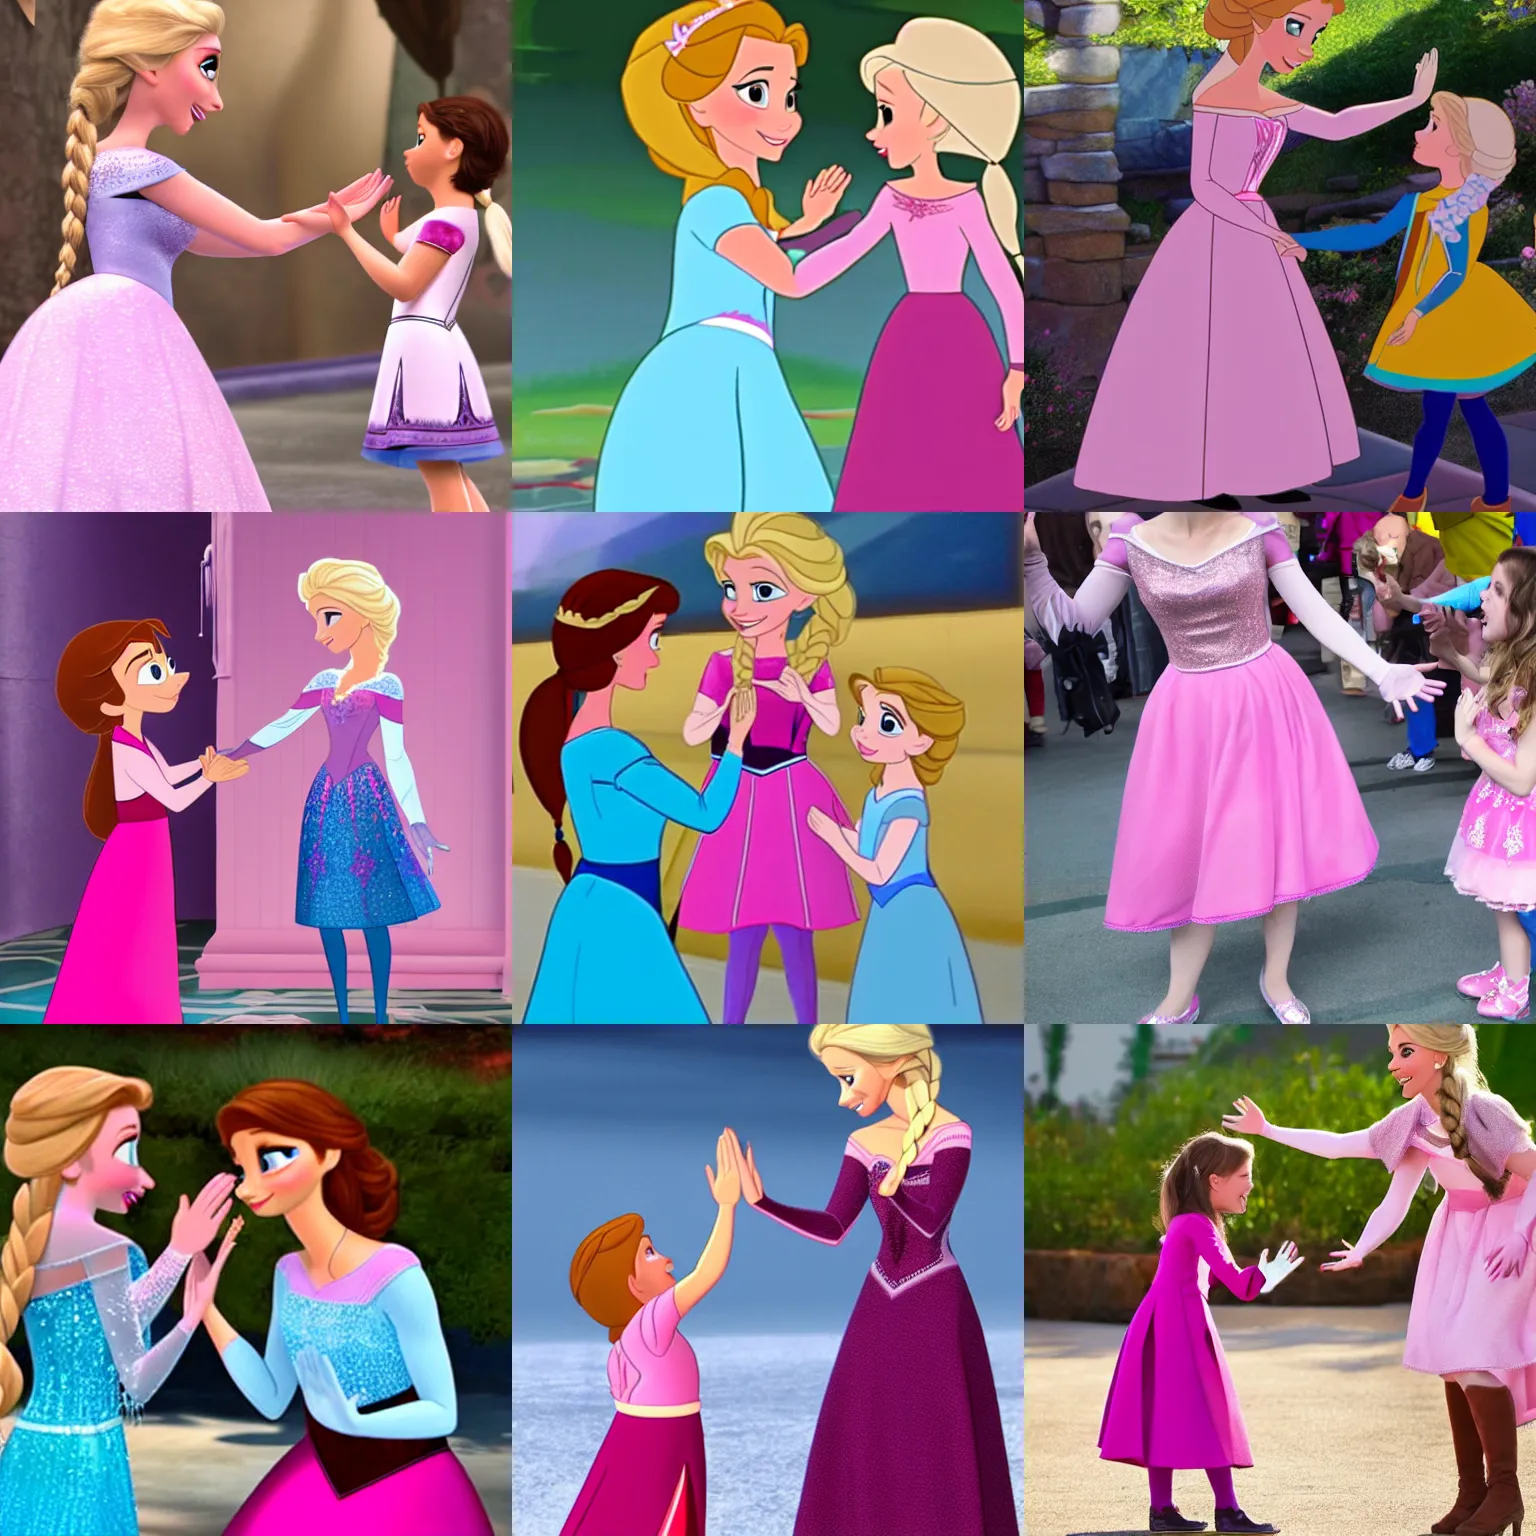 Prompt: elsa from fozen giving a high five to a little girl with brown hair and a pink dress, disney cartoon